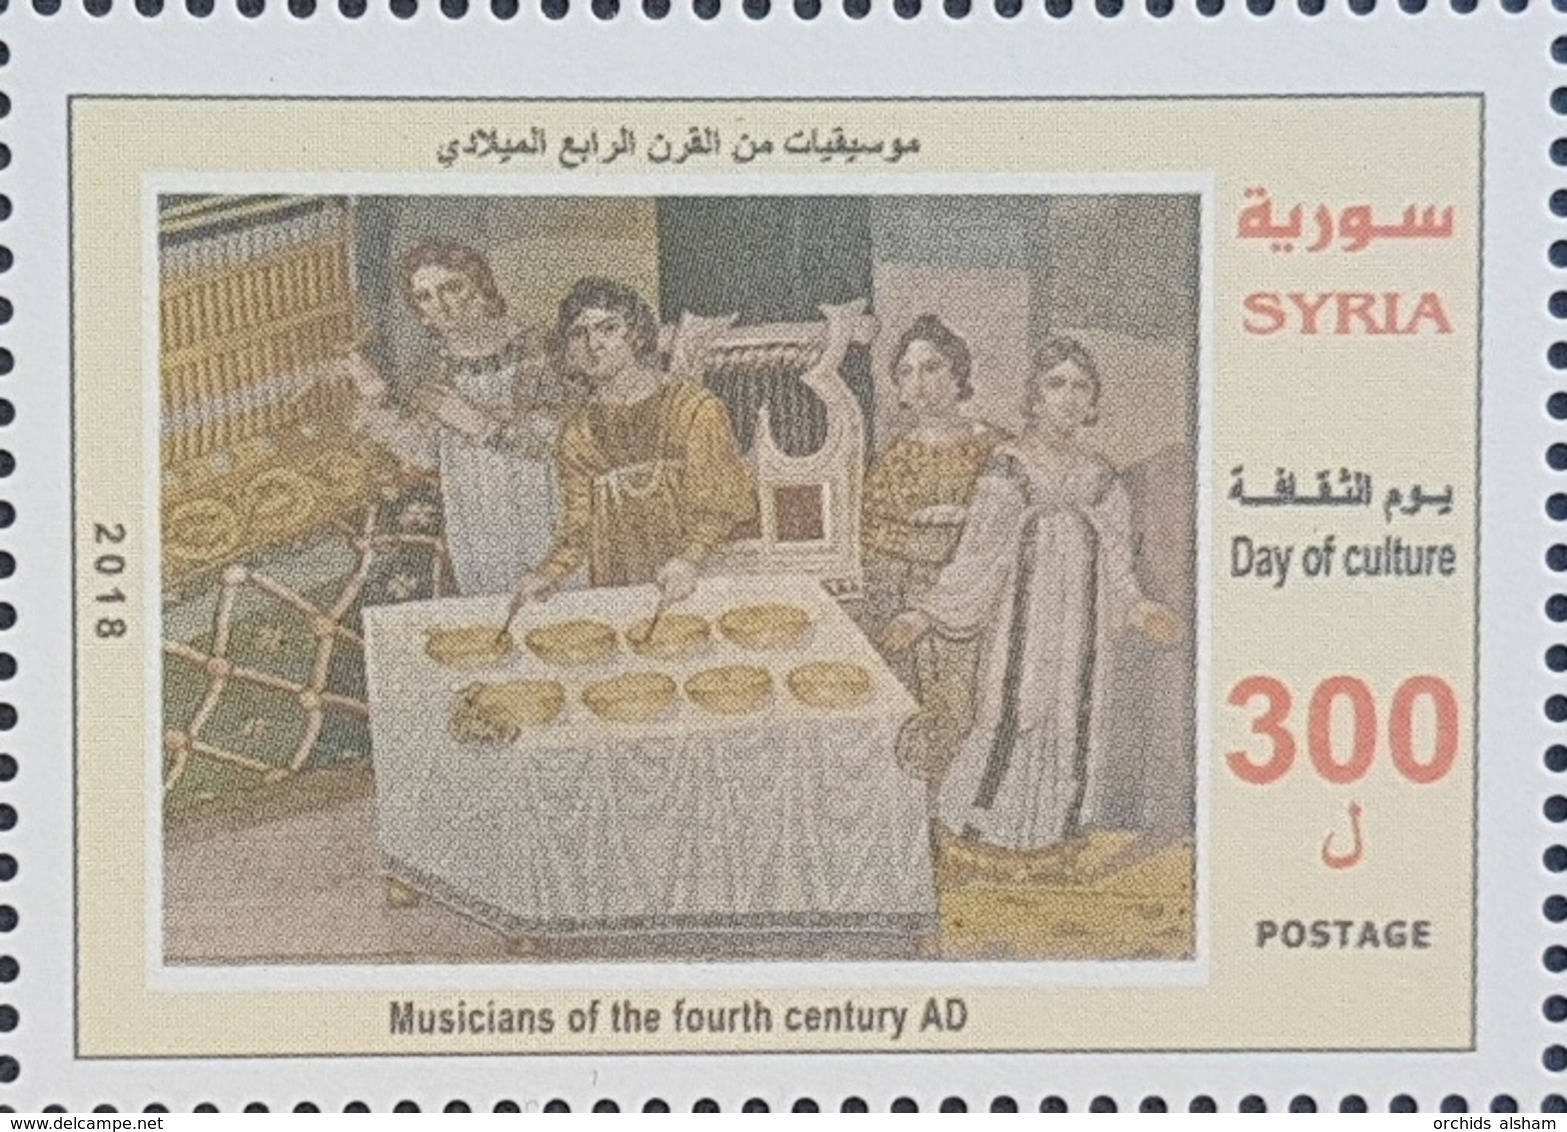 SYRIA NEW 2019 MNH Stamp - Day Of Culture, Music, Musicians Of The 4th Century - Syria